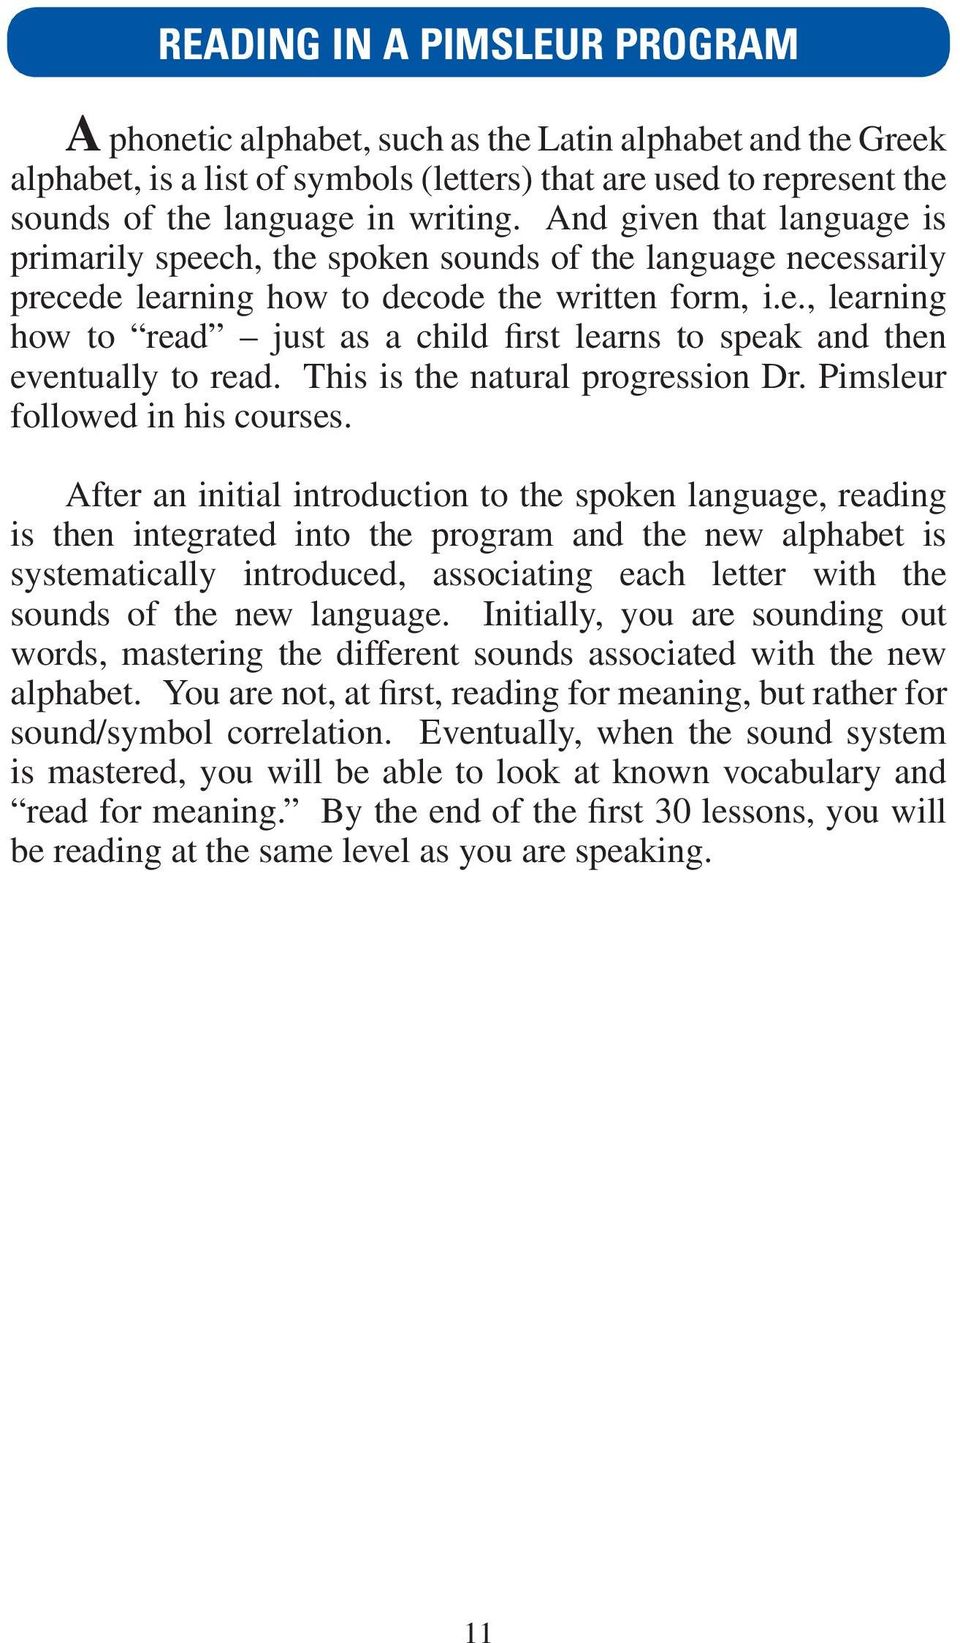 This is the natural progression Dr. Pimsleur followed in his courses.